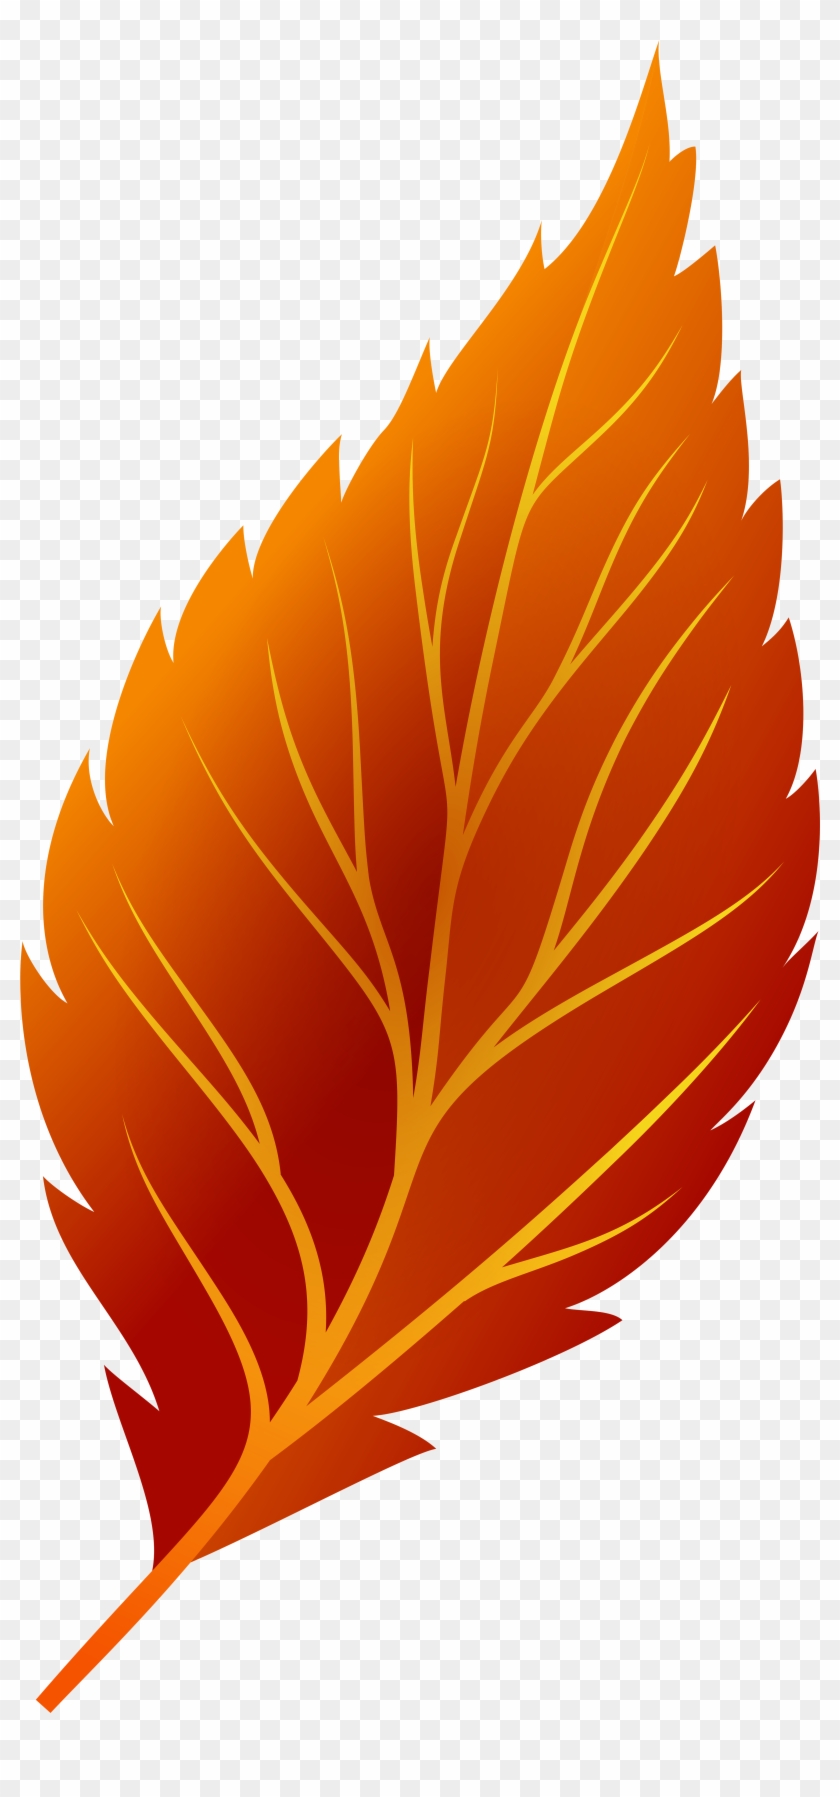 Red Autumn Leaf Png Clip Art - Autumn Leaves Leaves Png #383453